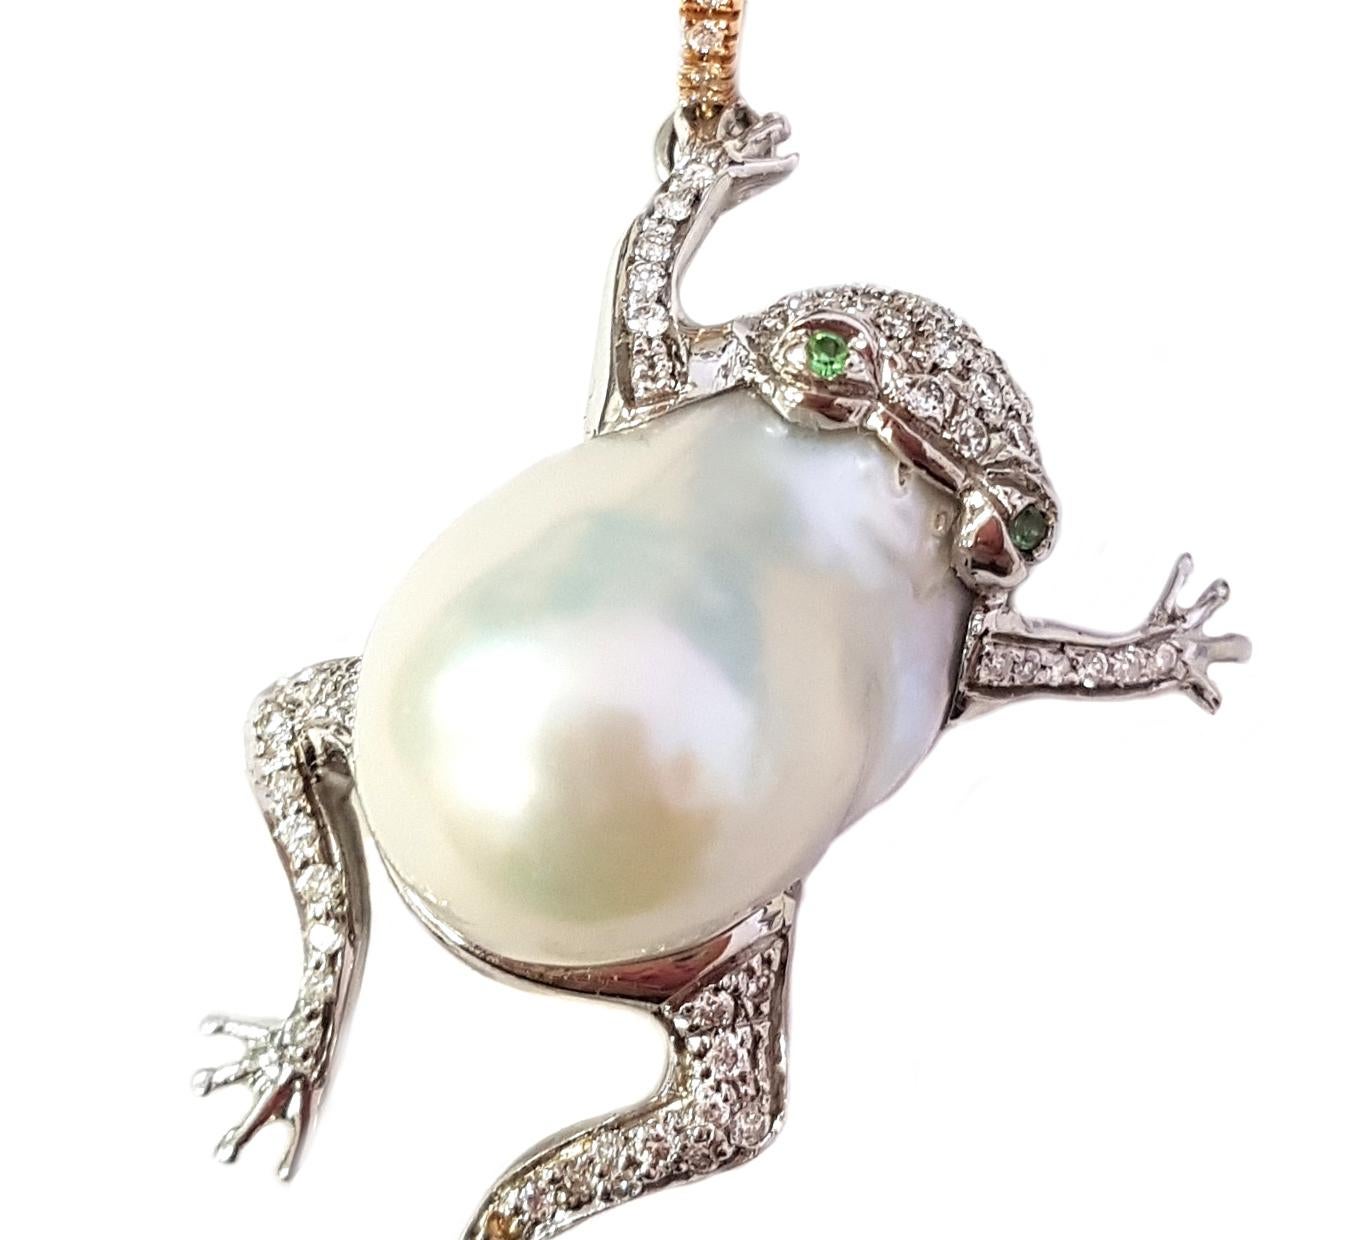 This lovely, entirely handmade pendant is made of a large Australian pearl fancifully reimagined in the form of a leaping frog. The head and legs of the frog are set with white diamonds, and two small tsavorites create brilliant, winking green eyes.